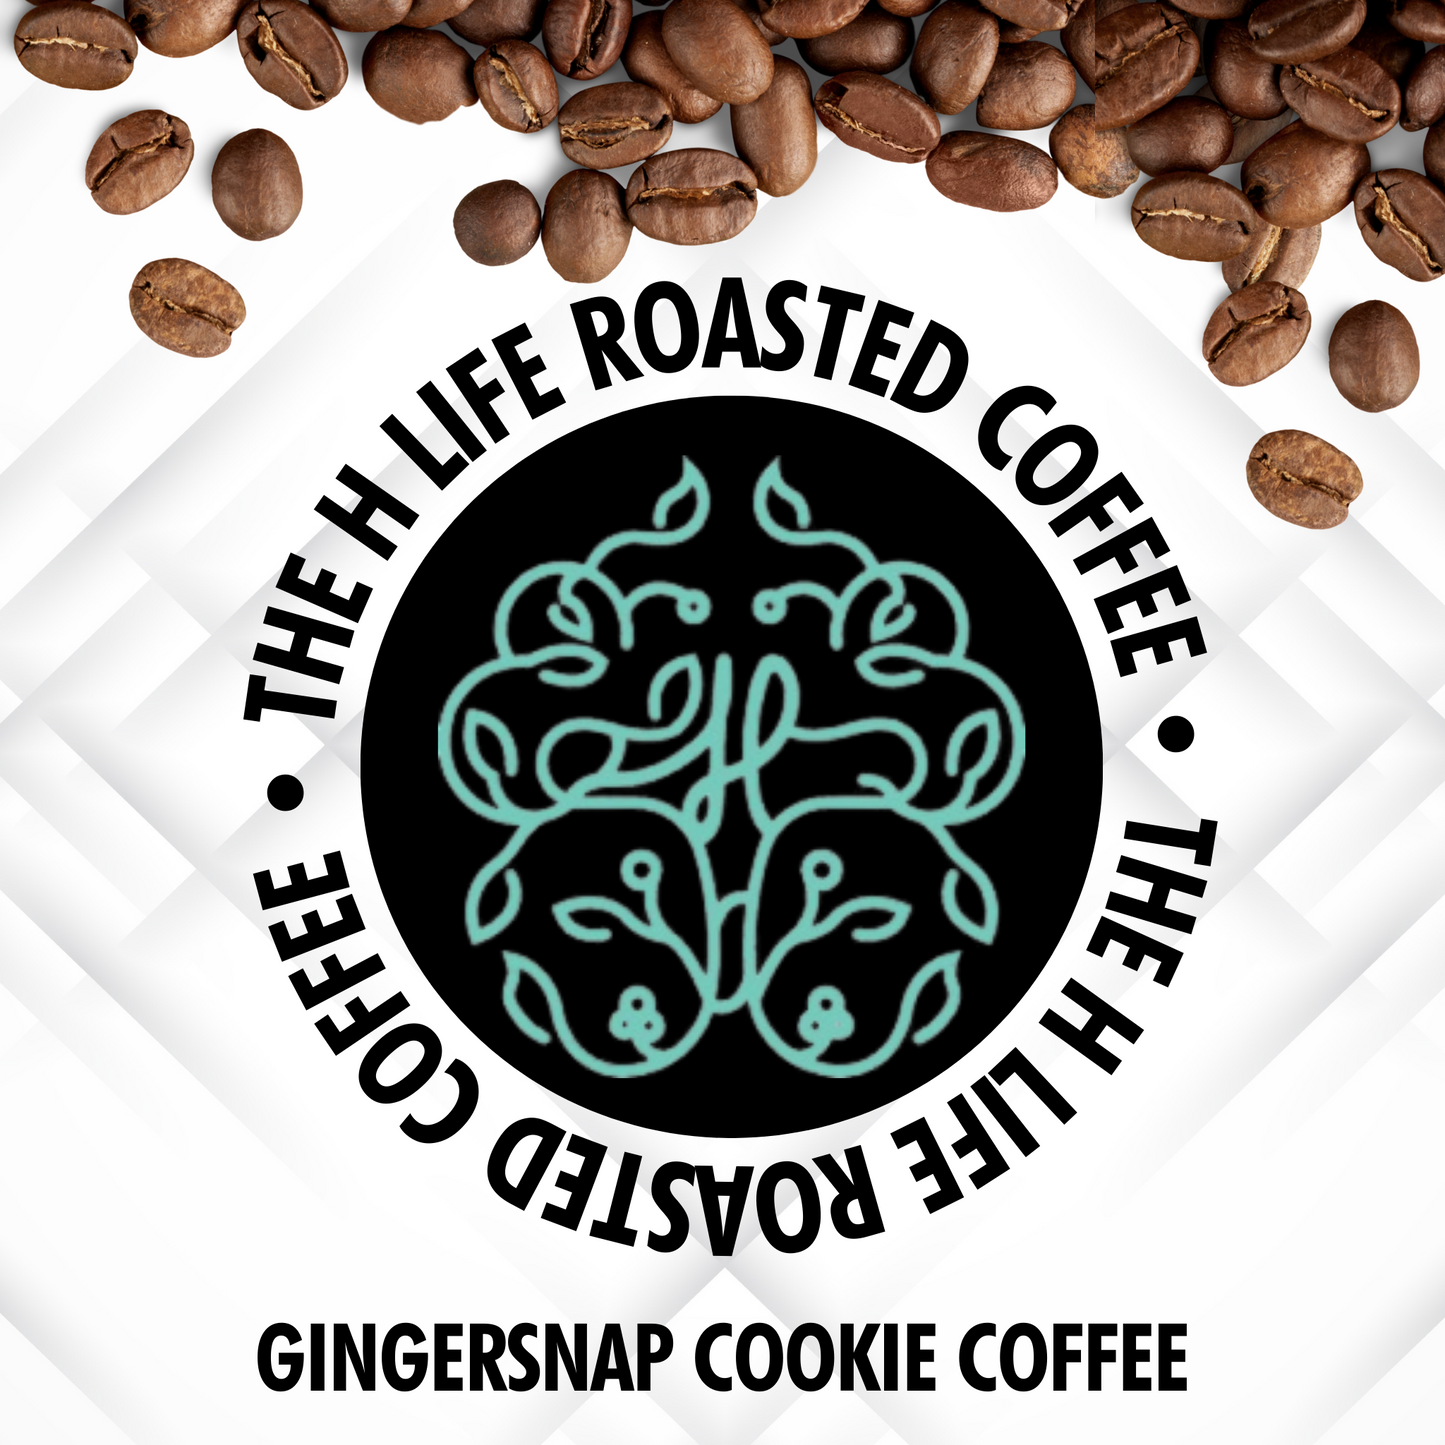 Gingersnap Cookie Coffee